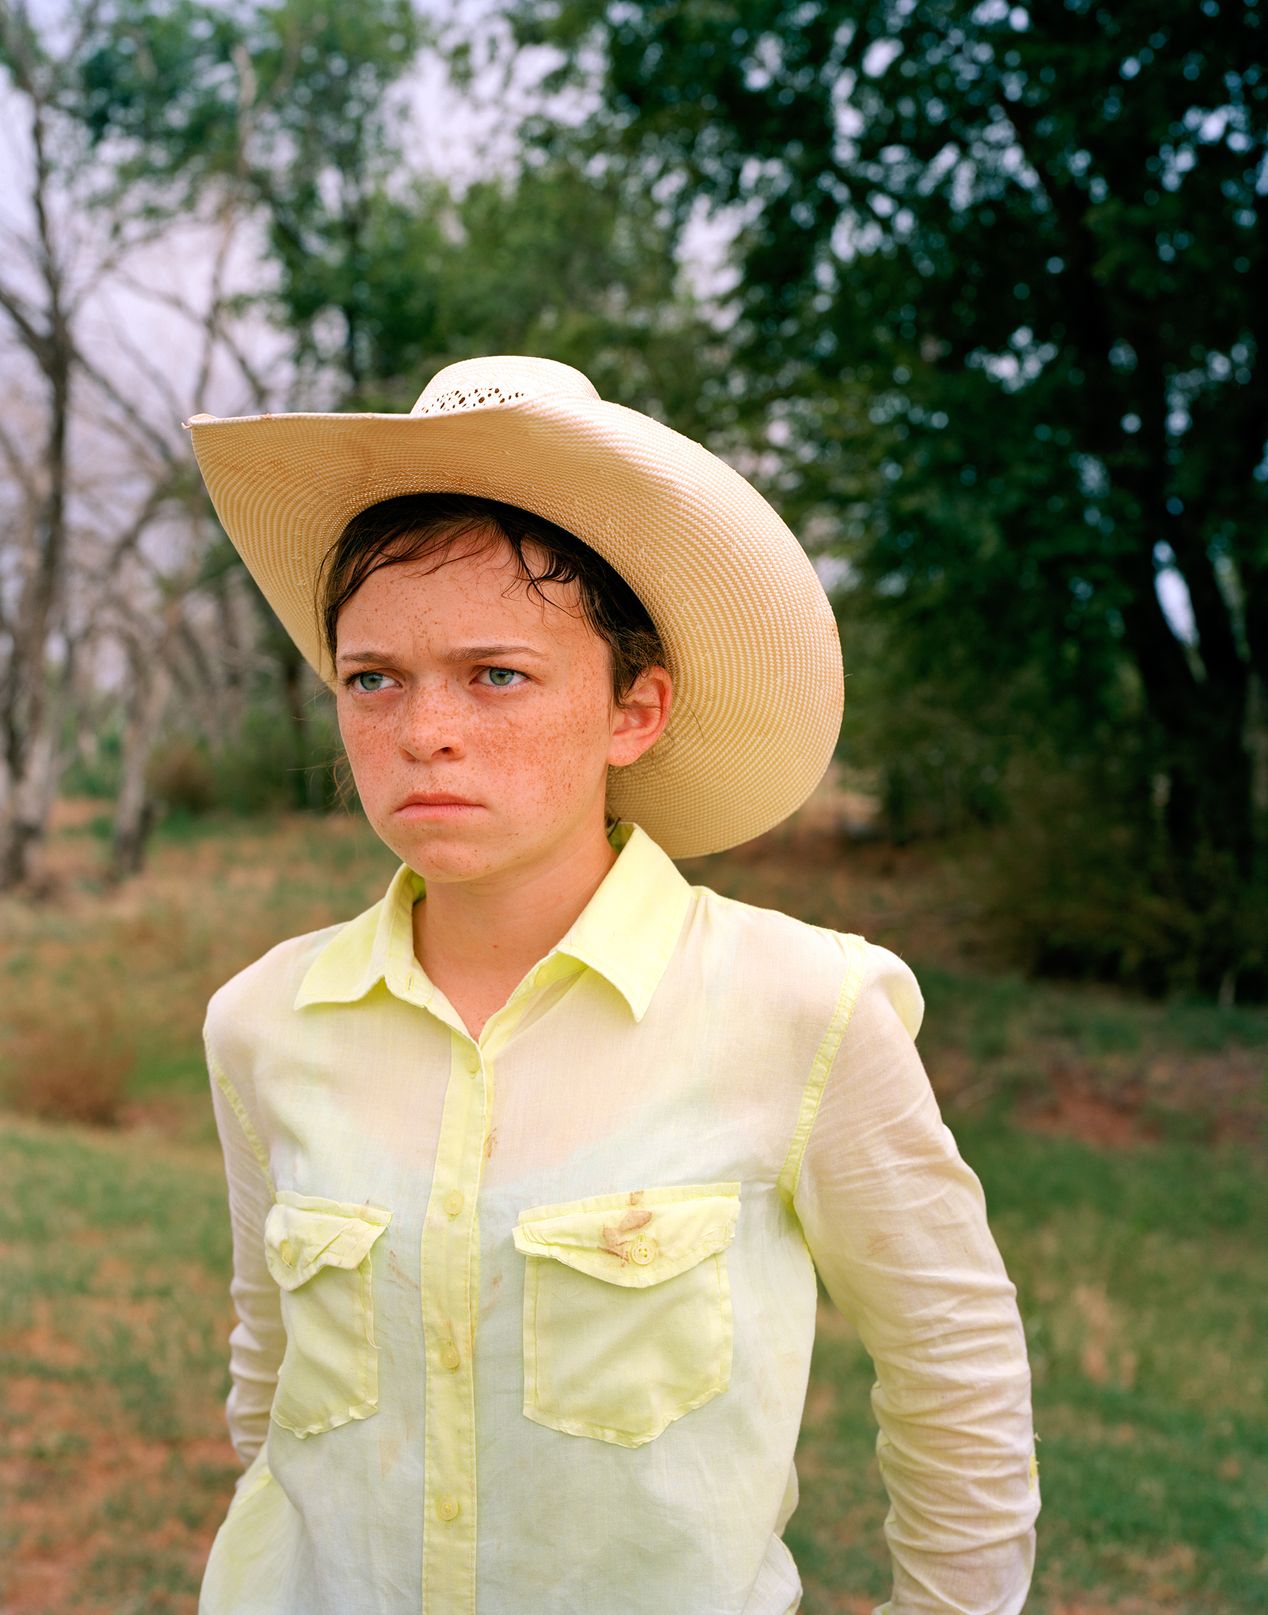 Young cowgirl in a light green shirt and a light cowboy hat, environmental portrait photography, Ilona Szwarc, contemporary Los Angeles artist.